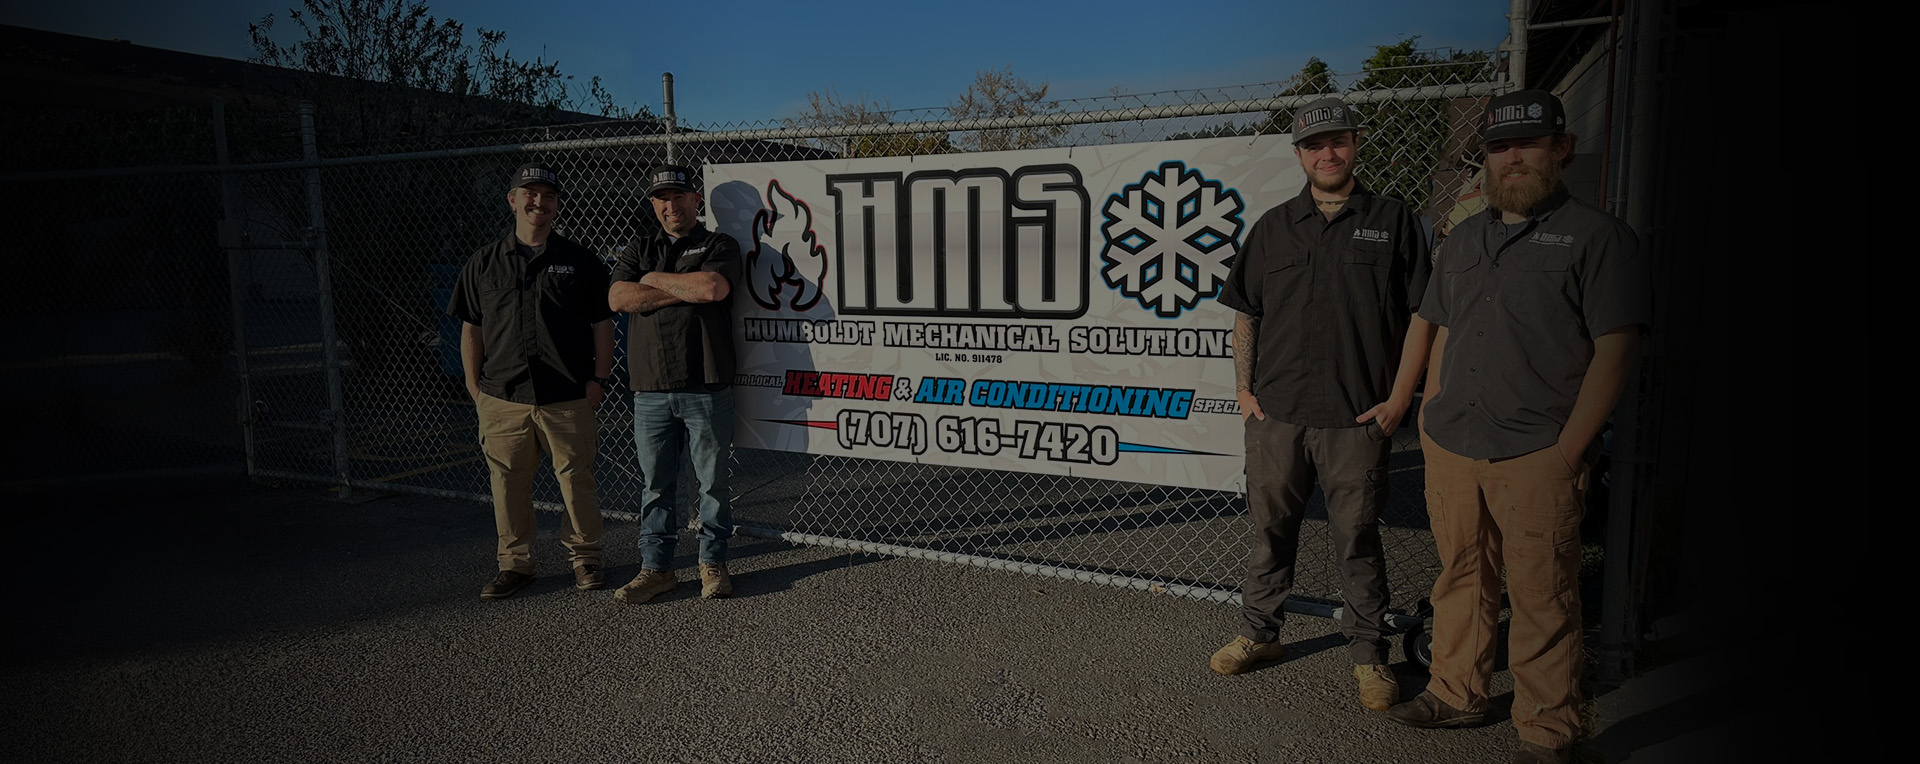 Humboldt Mechanical Solutions Team of HVAC Services Experts Humboldt County Group Photo